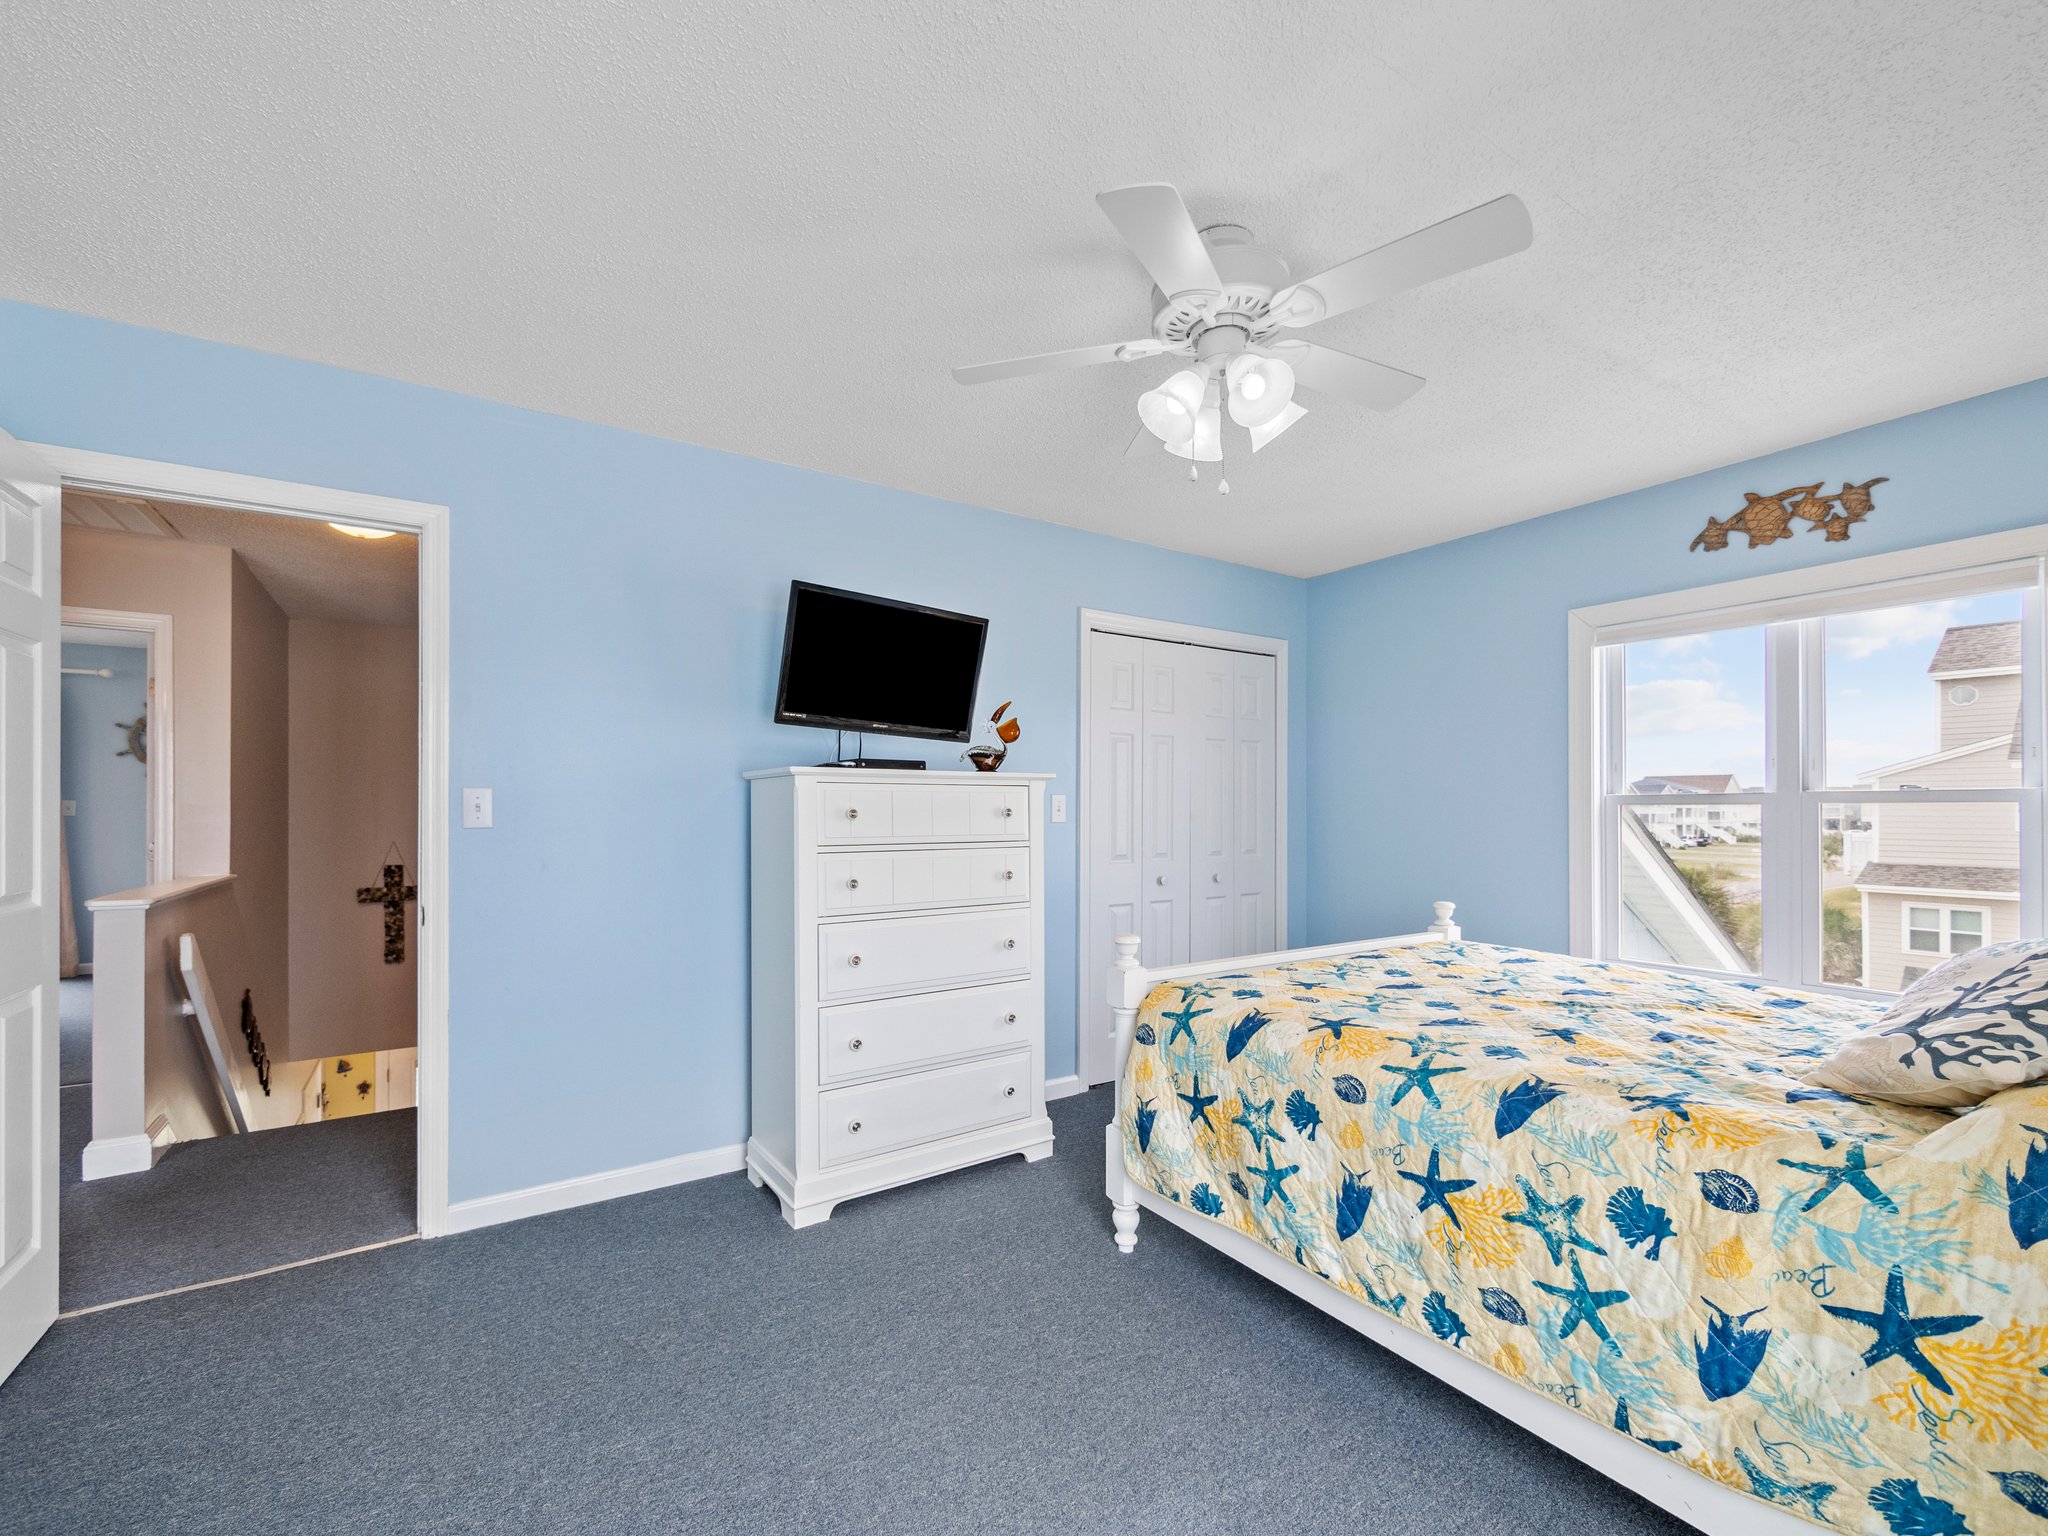 1222 New River Inlet Rd, North Topsail Beach, NC 28460, USA Photo 28